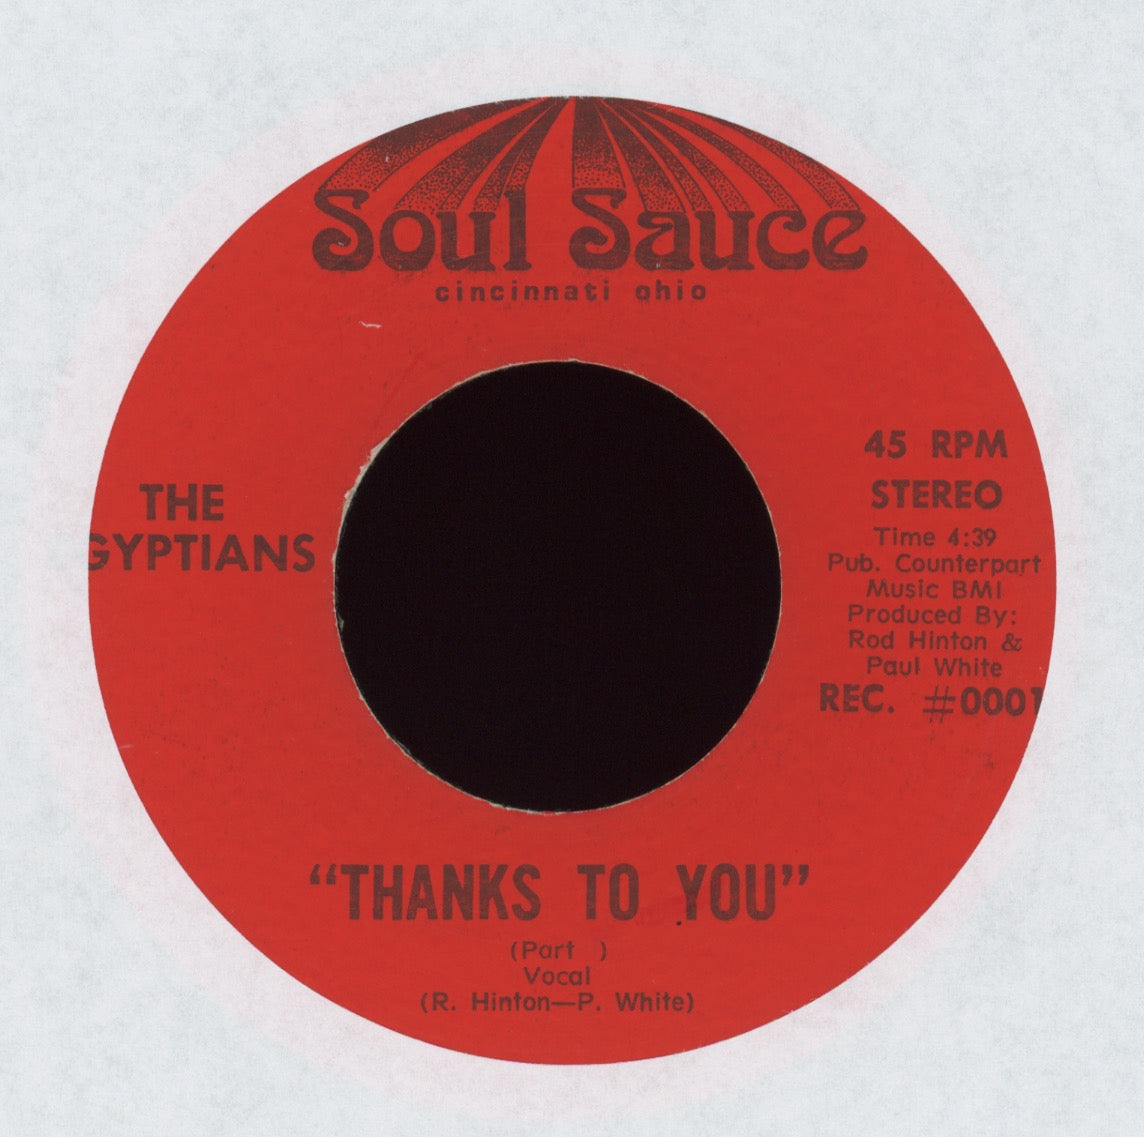 The Egyptians - Thanks To You on Soul Sauce